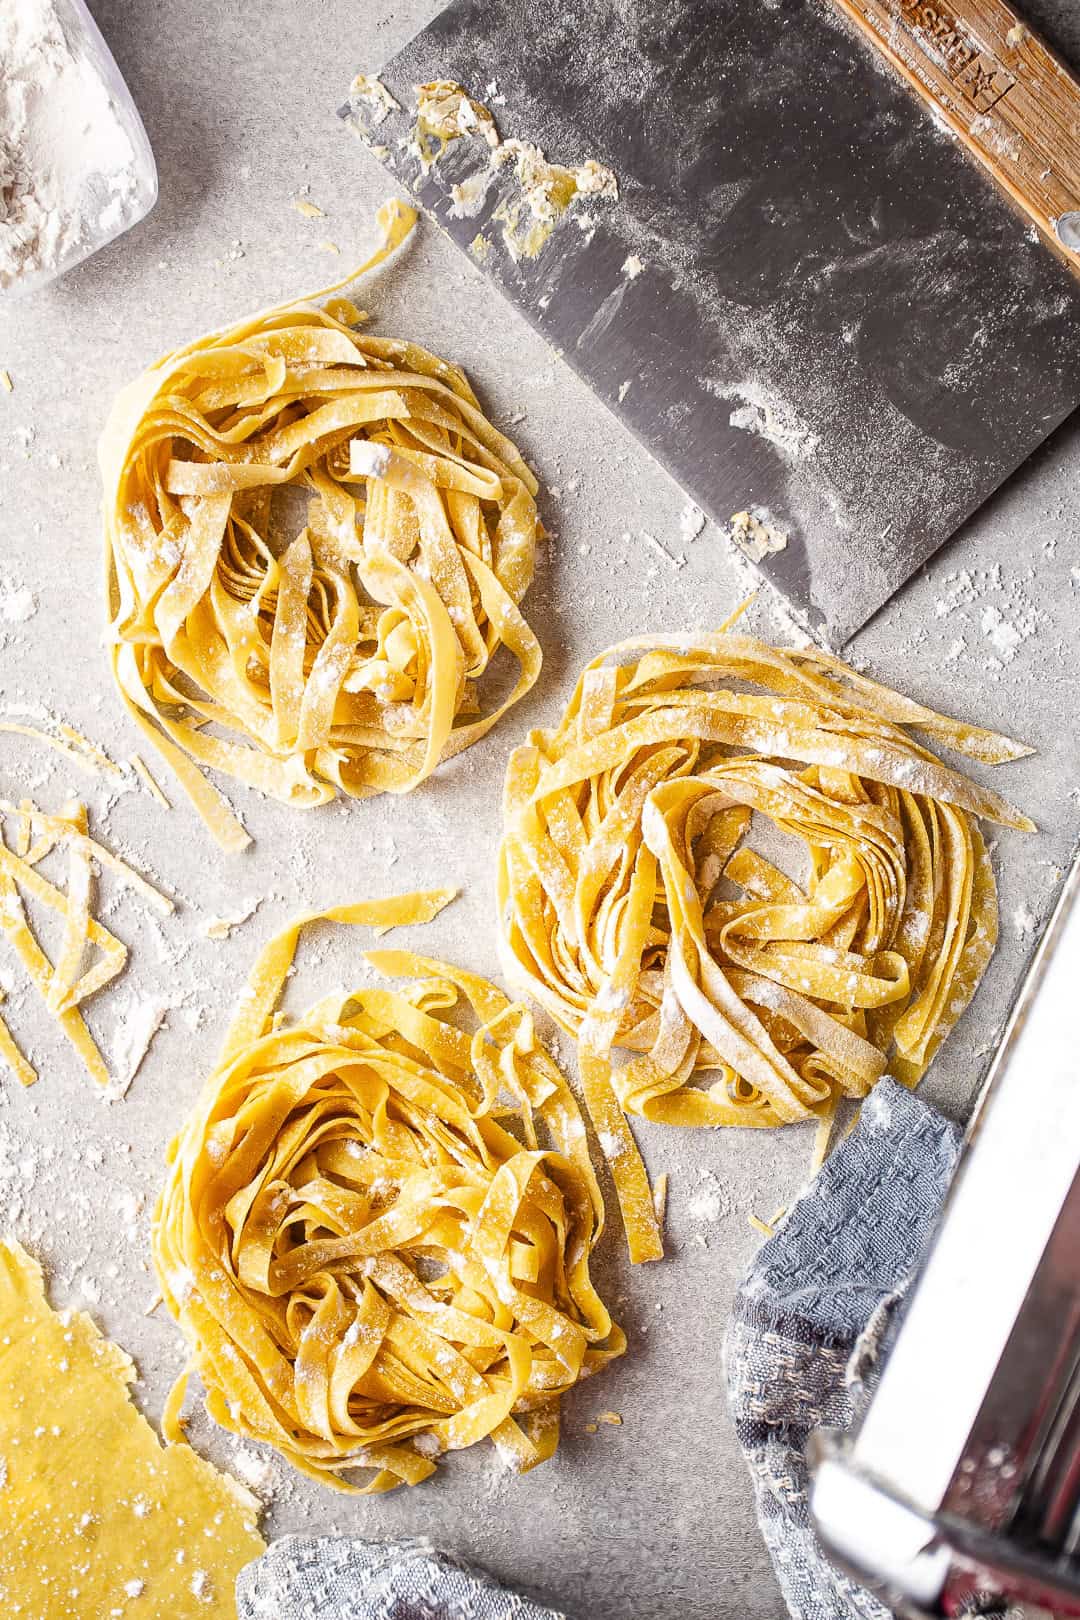 How to make homemade pasta with step-by-step photo instructions.